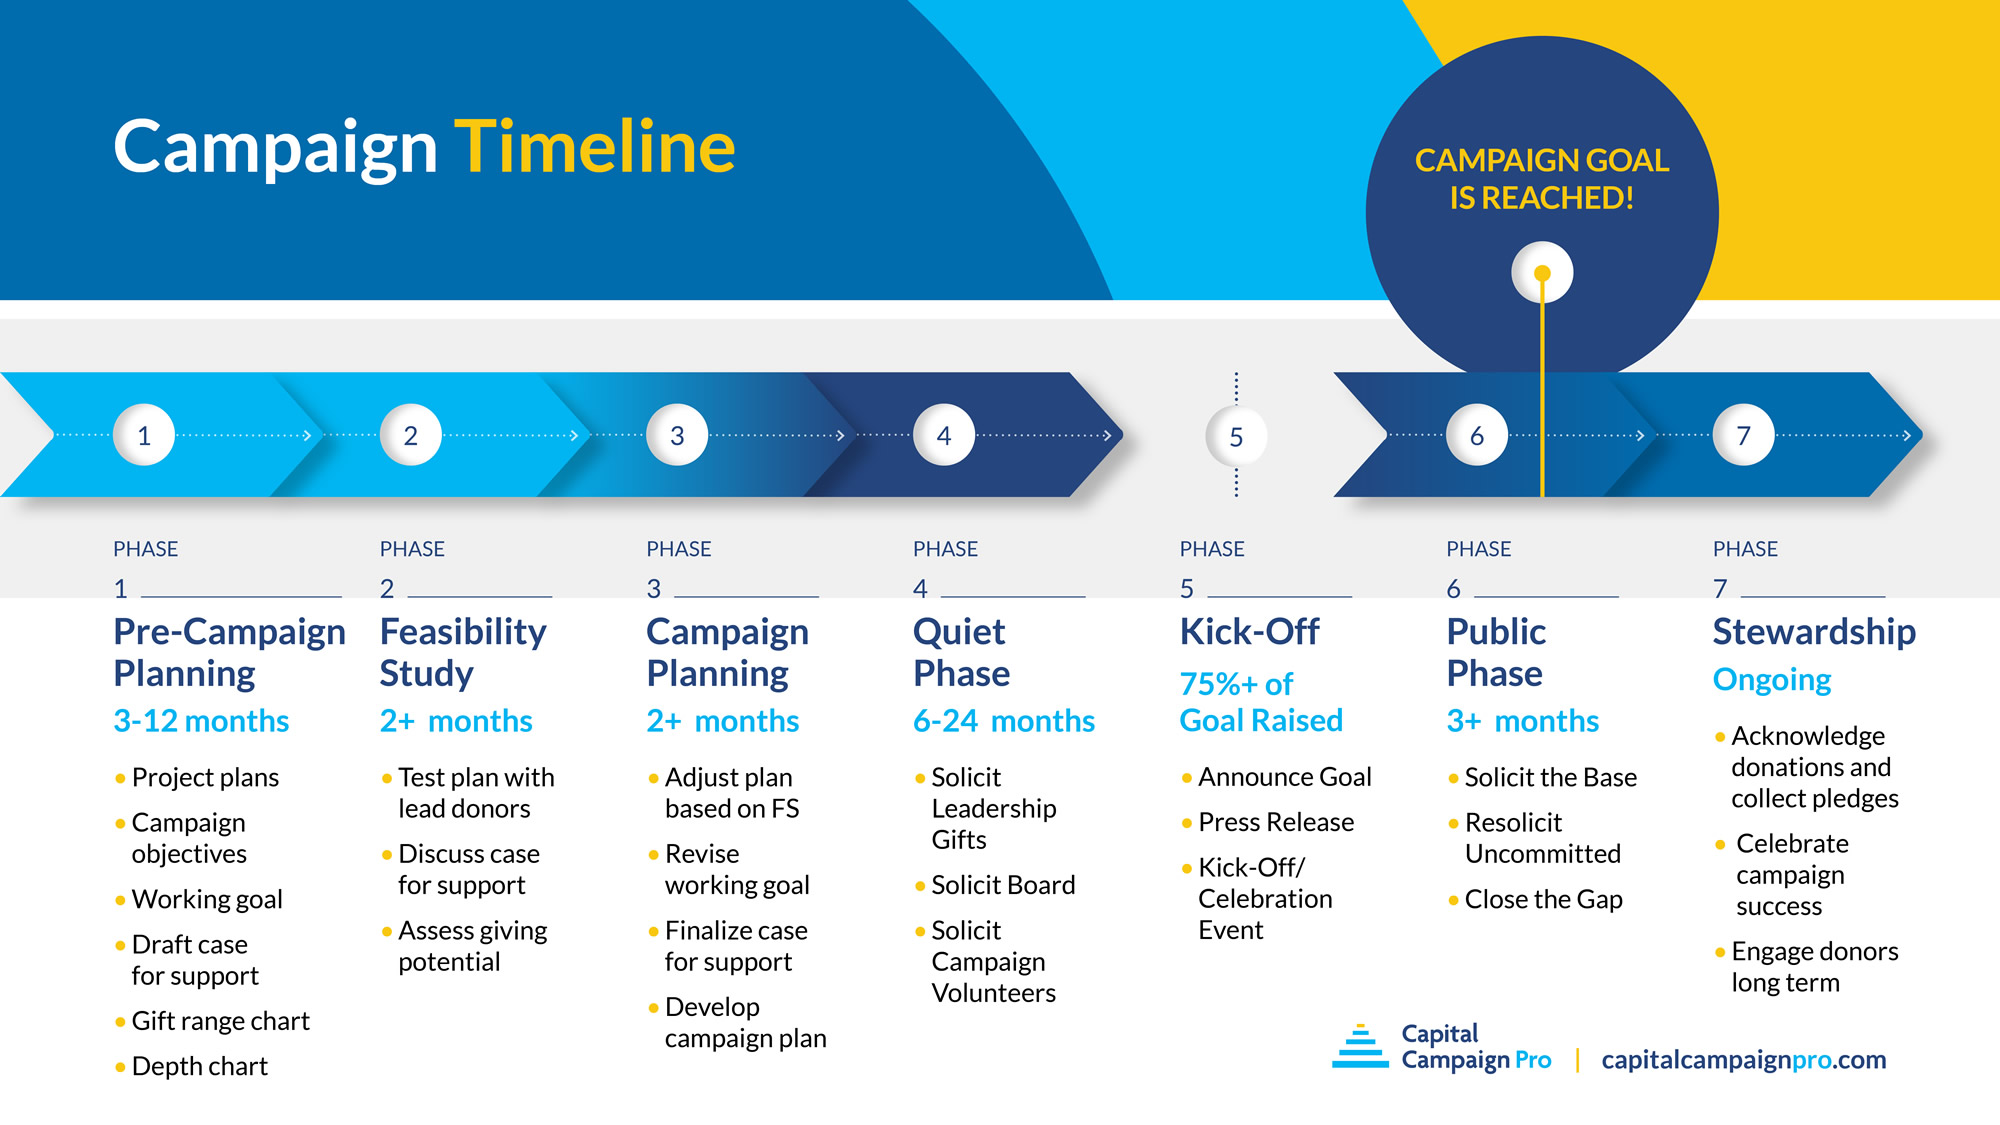 Your capital campaign timeline should include the seven phases outlined here.